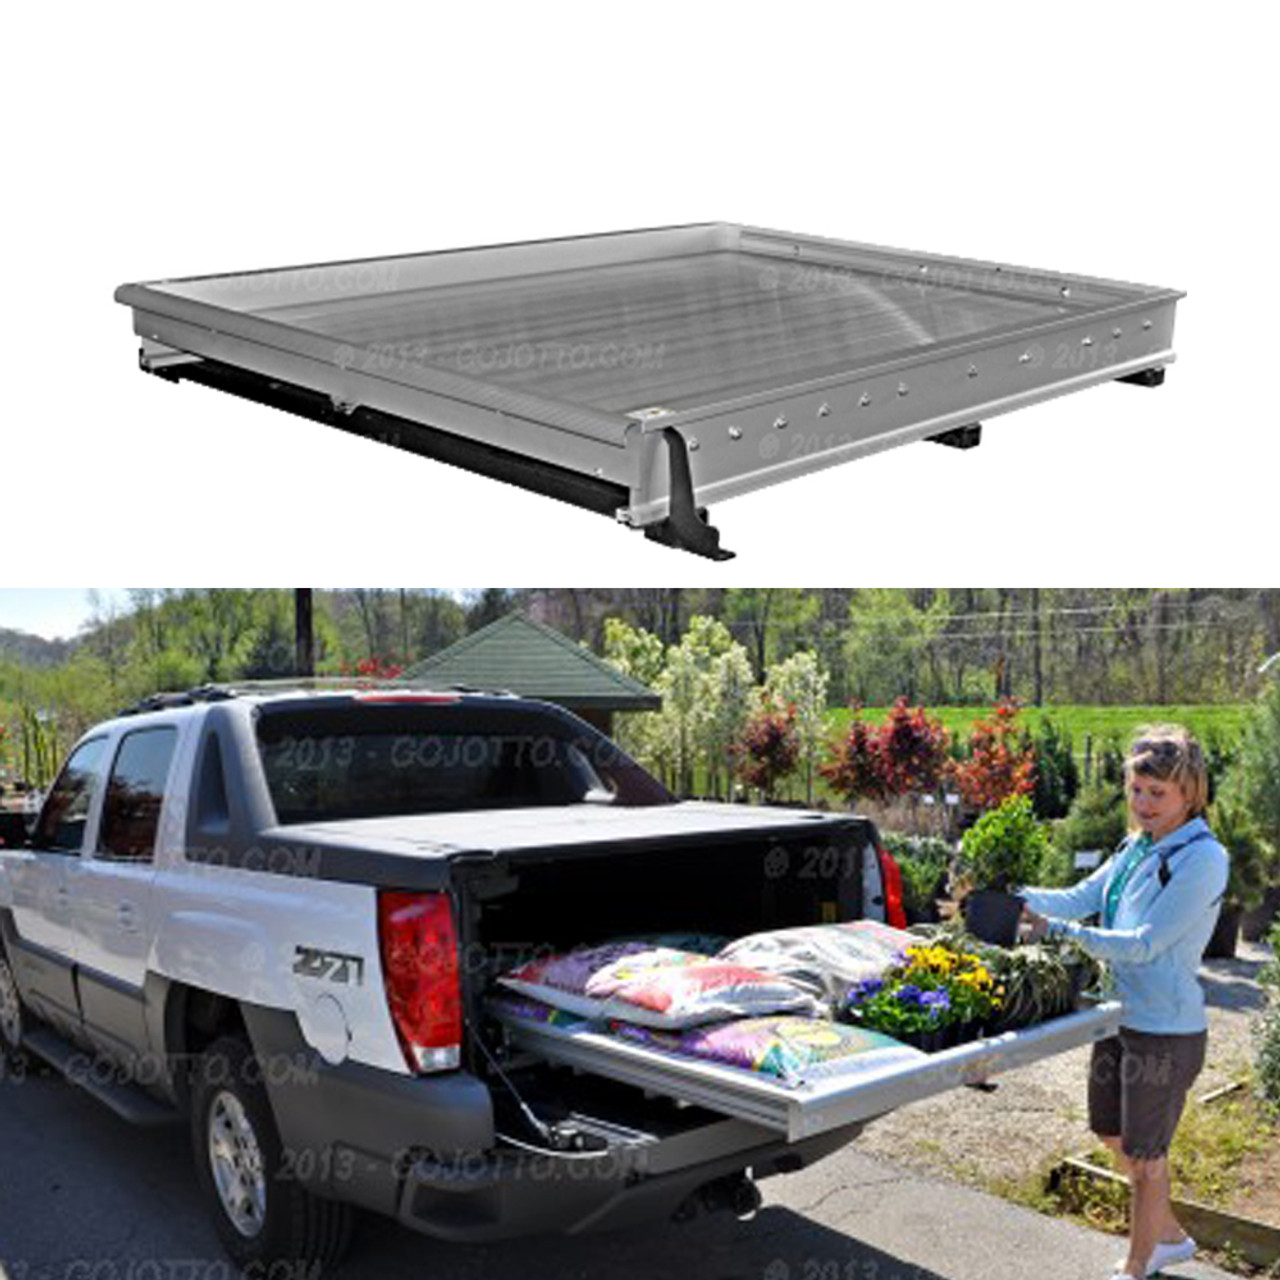 Jotto-Cargo Slide 410-9040, Truck-Bed Cargo Slide fits Lincoln LT with 5.5' Bed, 800 lbs Capacity, 65" Length, 49" Width, Weighs 106 lbs, Aluminum, with optional AlumaPlank Flooring system